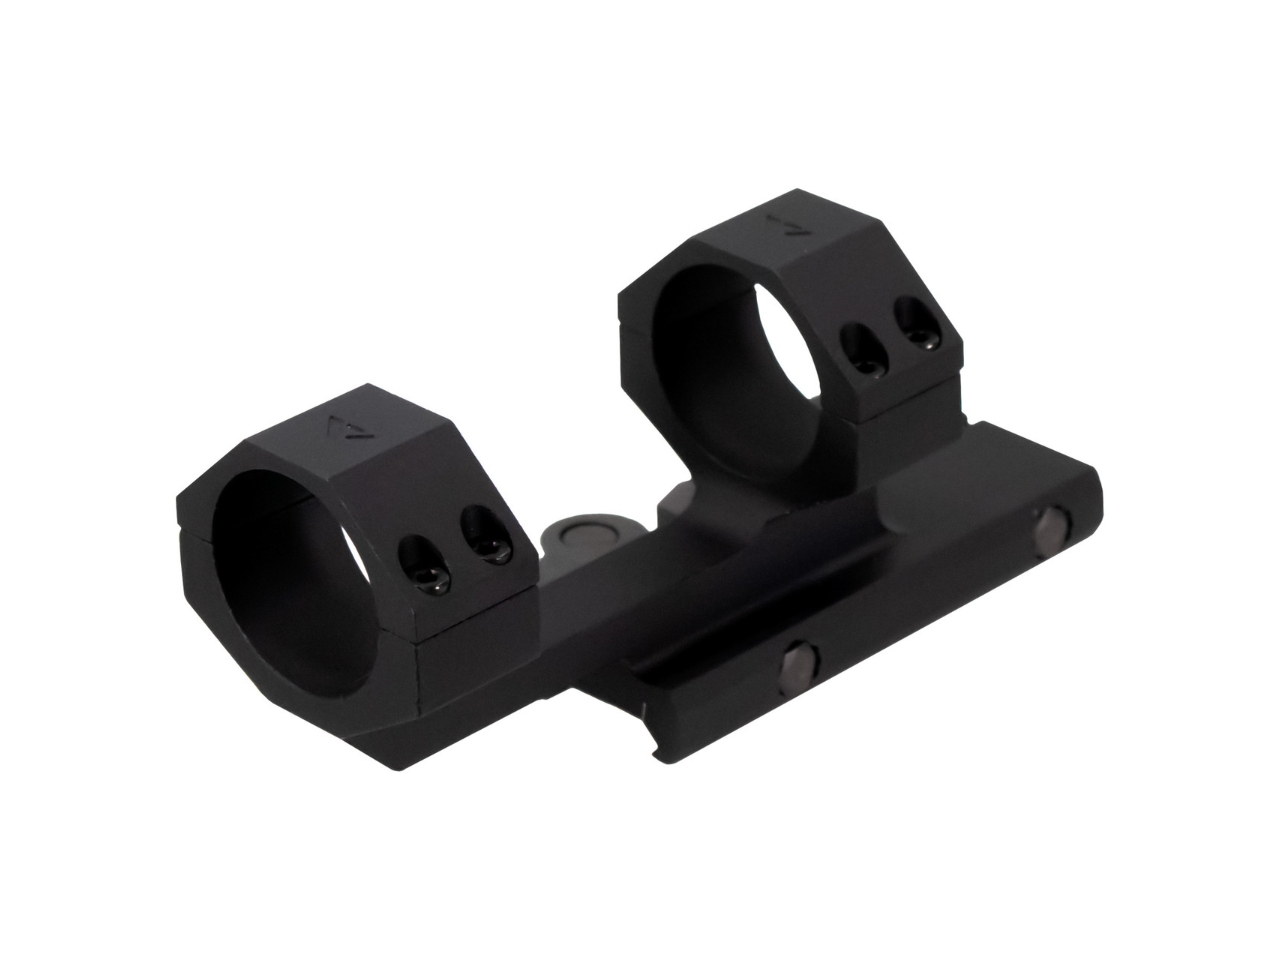 AIM 30mm QD Cantilever Scope Mount 1.5"" Height